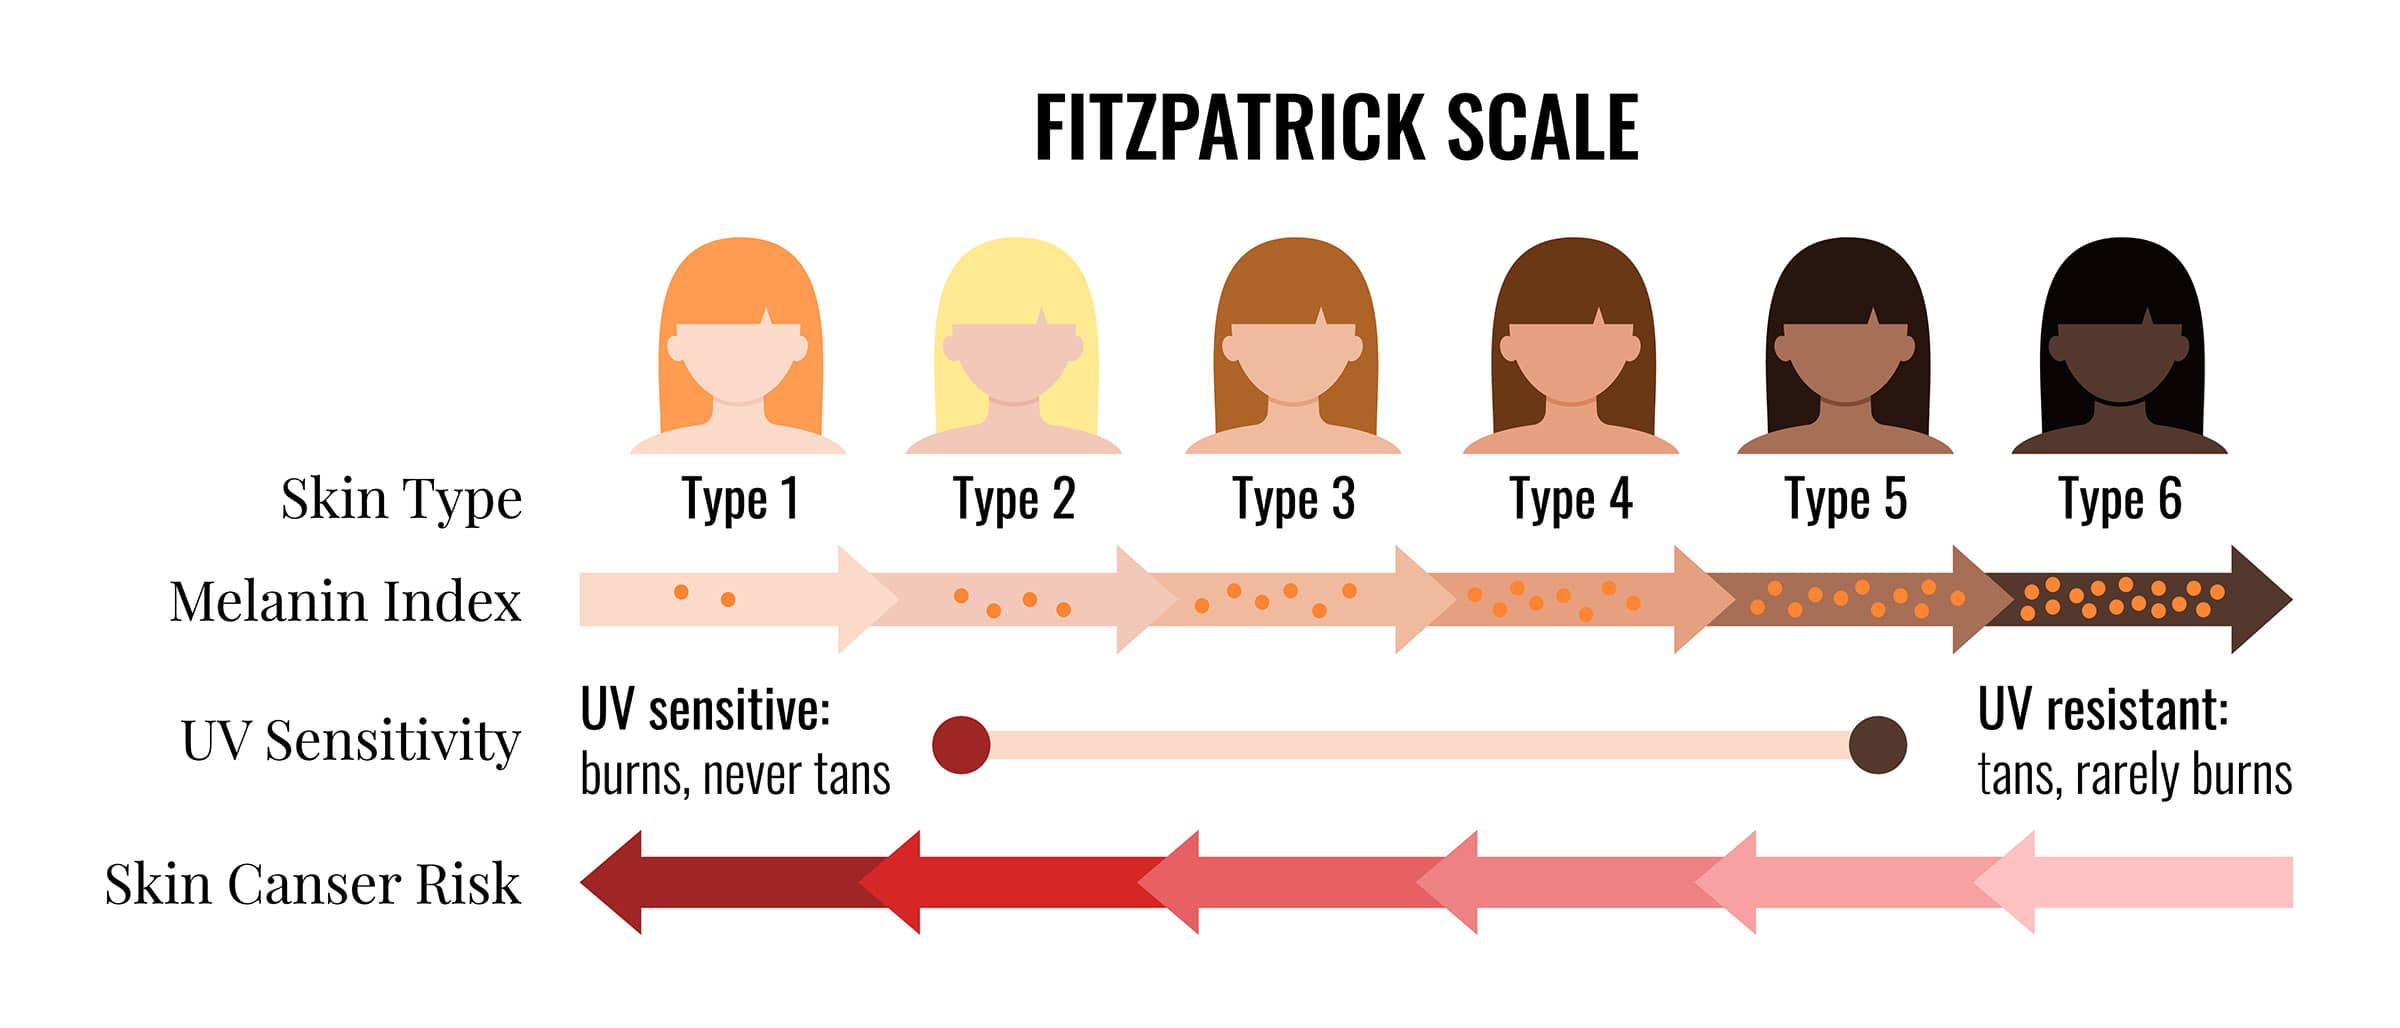 what is the fitzpatrick scale